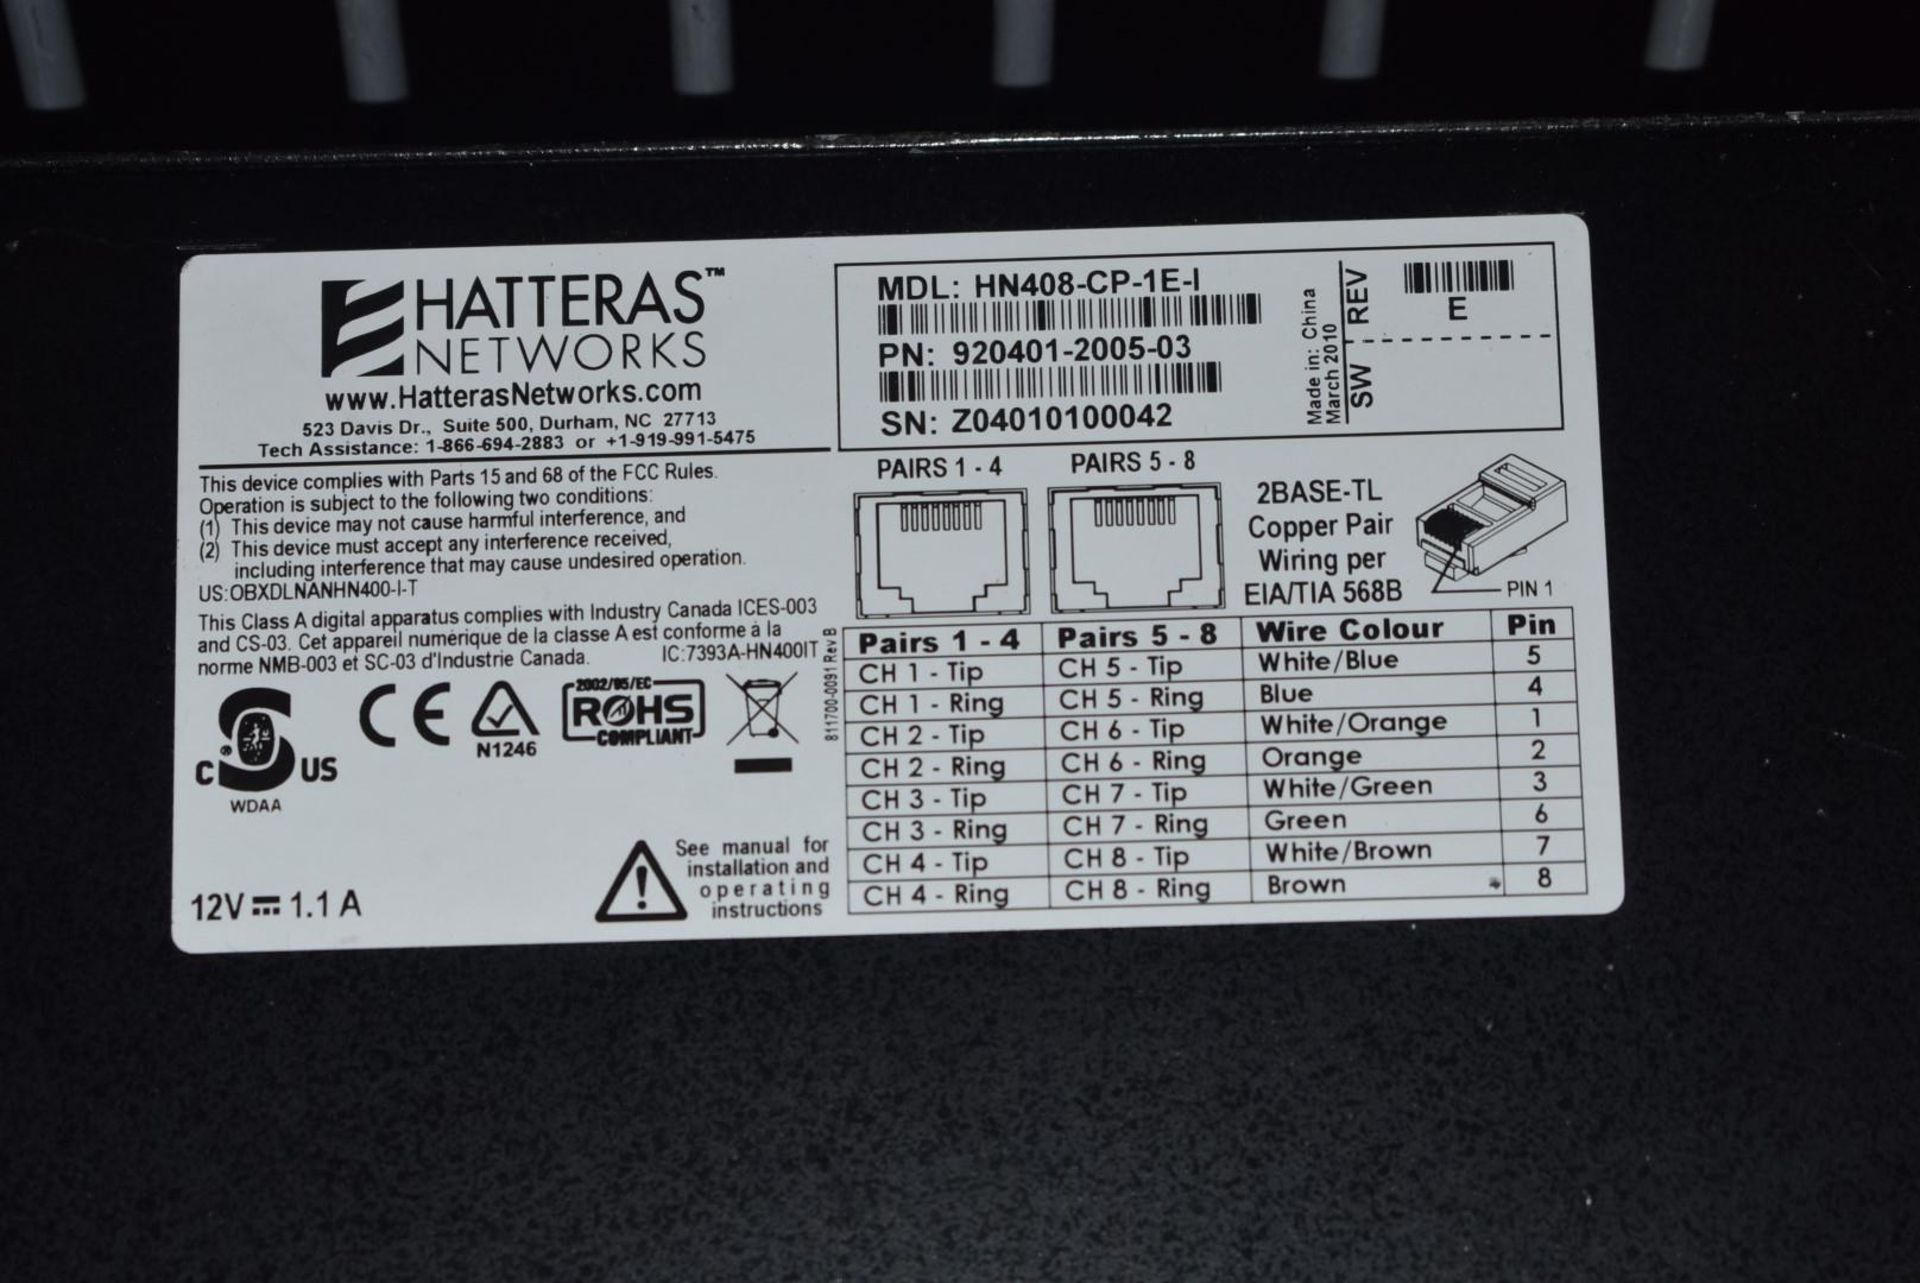 1 x Hatteras Networks HN408-CPi Ethernet Modem - Ref: MPC697 WH3 - CL011 - Location: Altrincham - Image 3 of 5